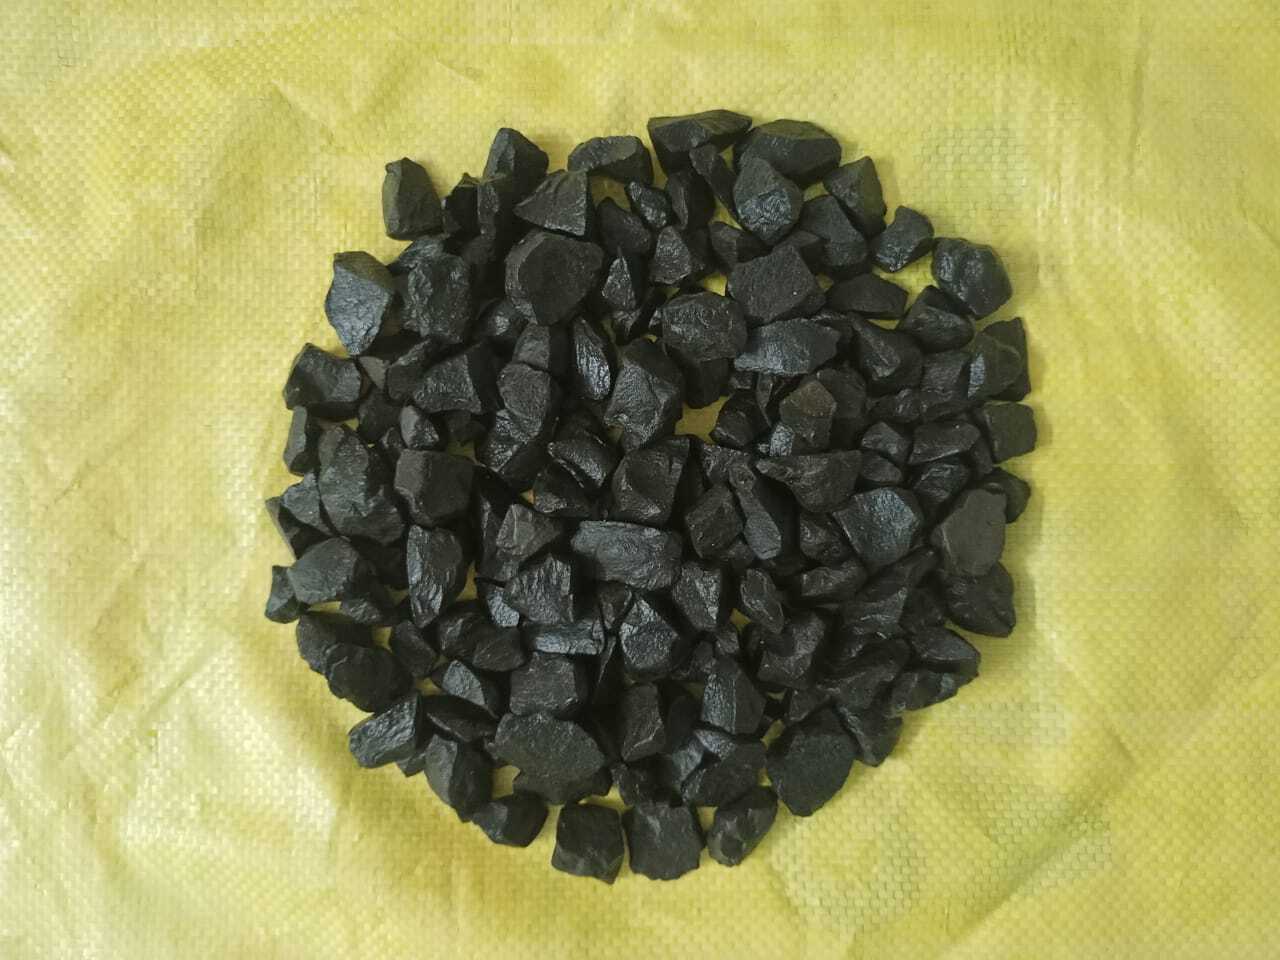 jet black marble chips and decorative landscping stone aggregate